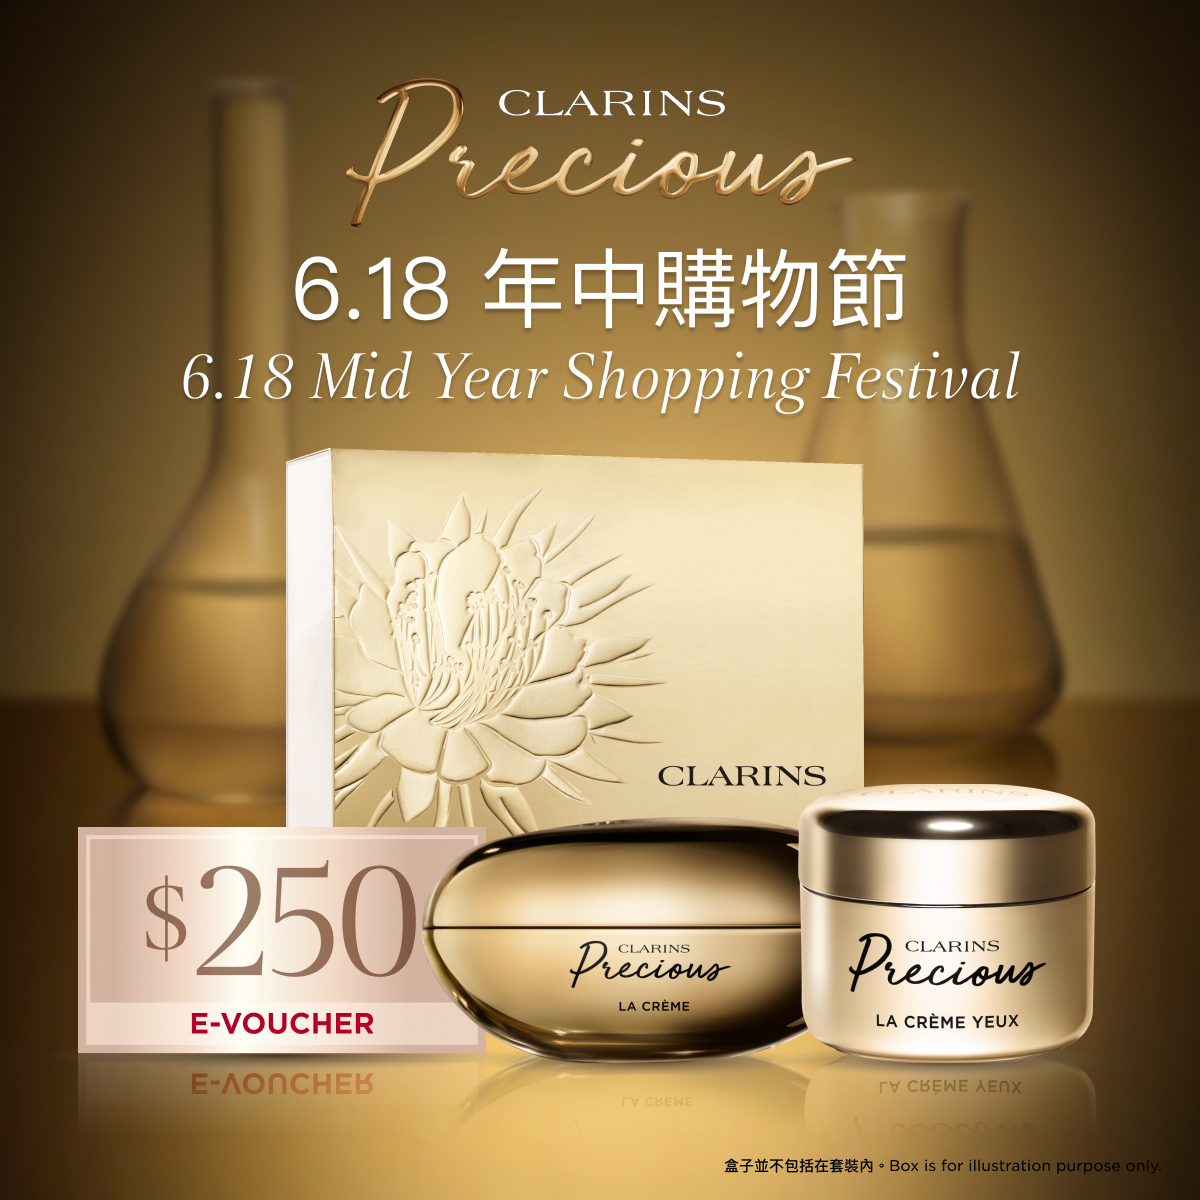 6.18 Mid Year Shopping Festival] Precious Discovery Set | CLARINS®